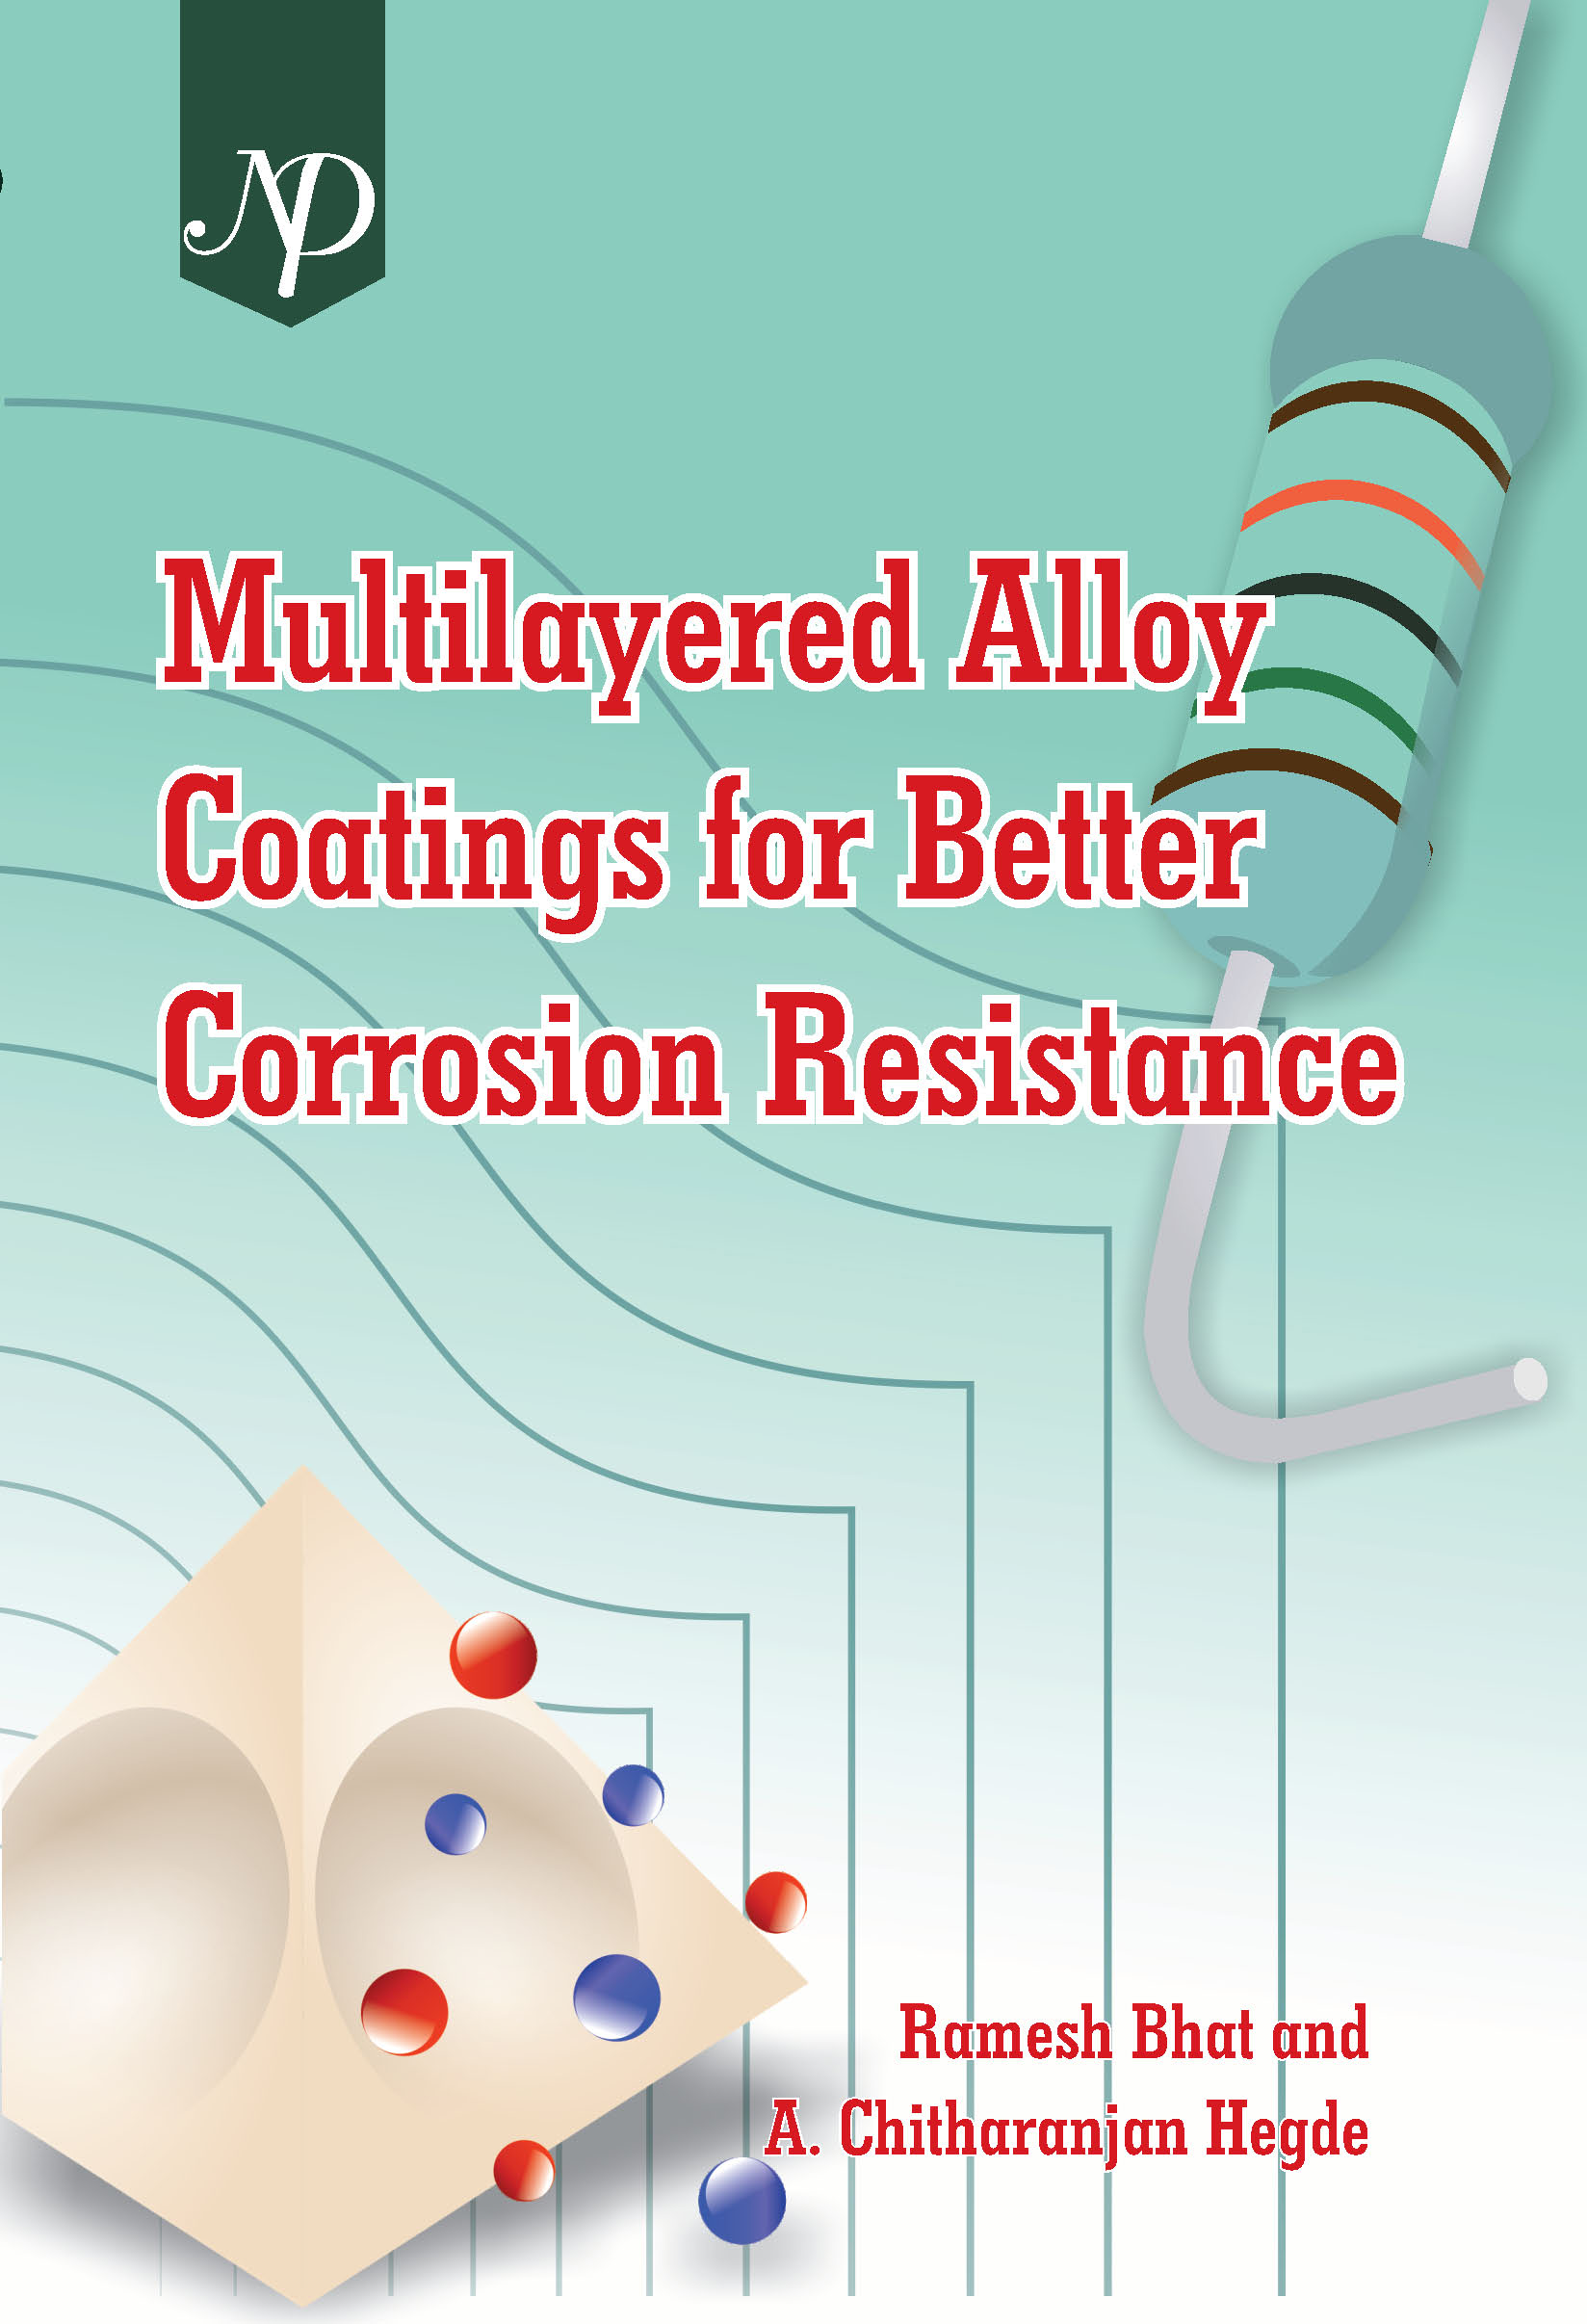 Multilayered Alloy Coatings for Better Corrosion Resistance Cover.jpg